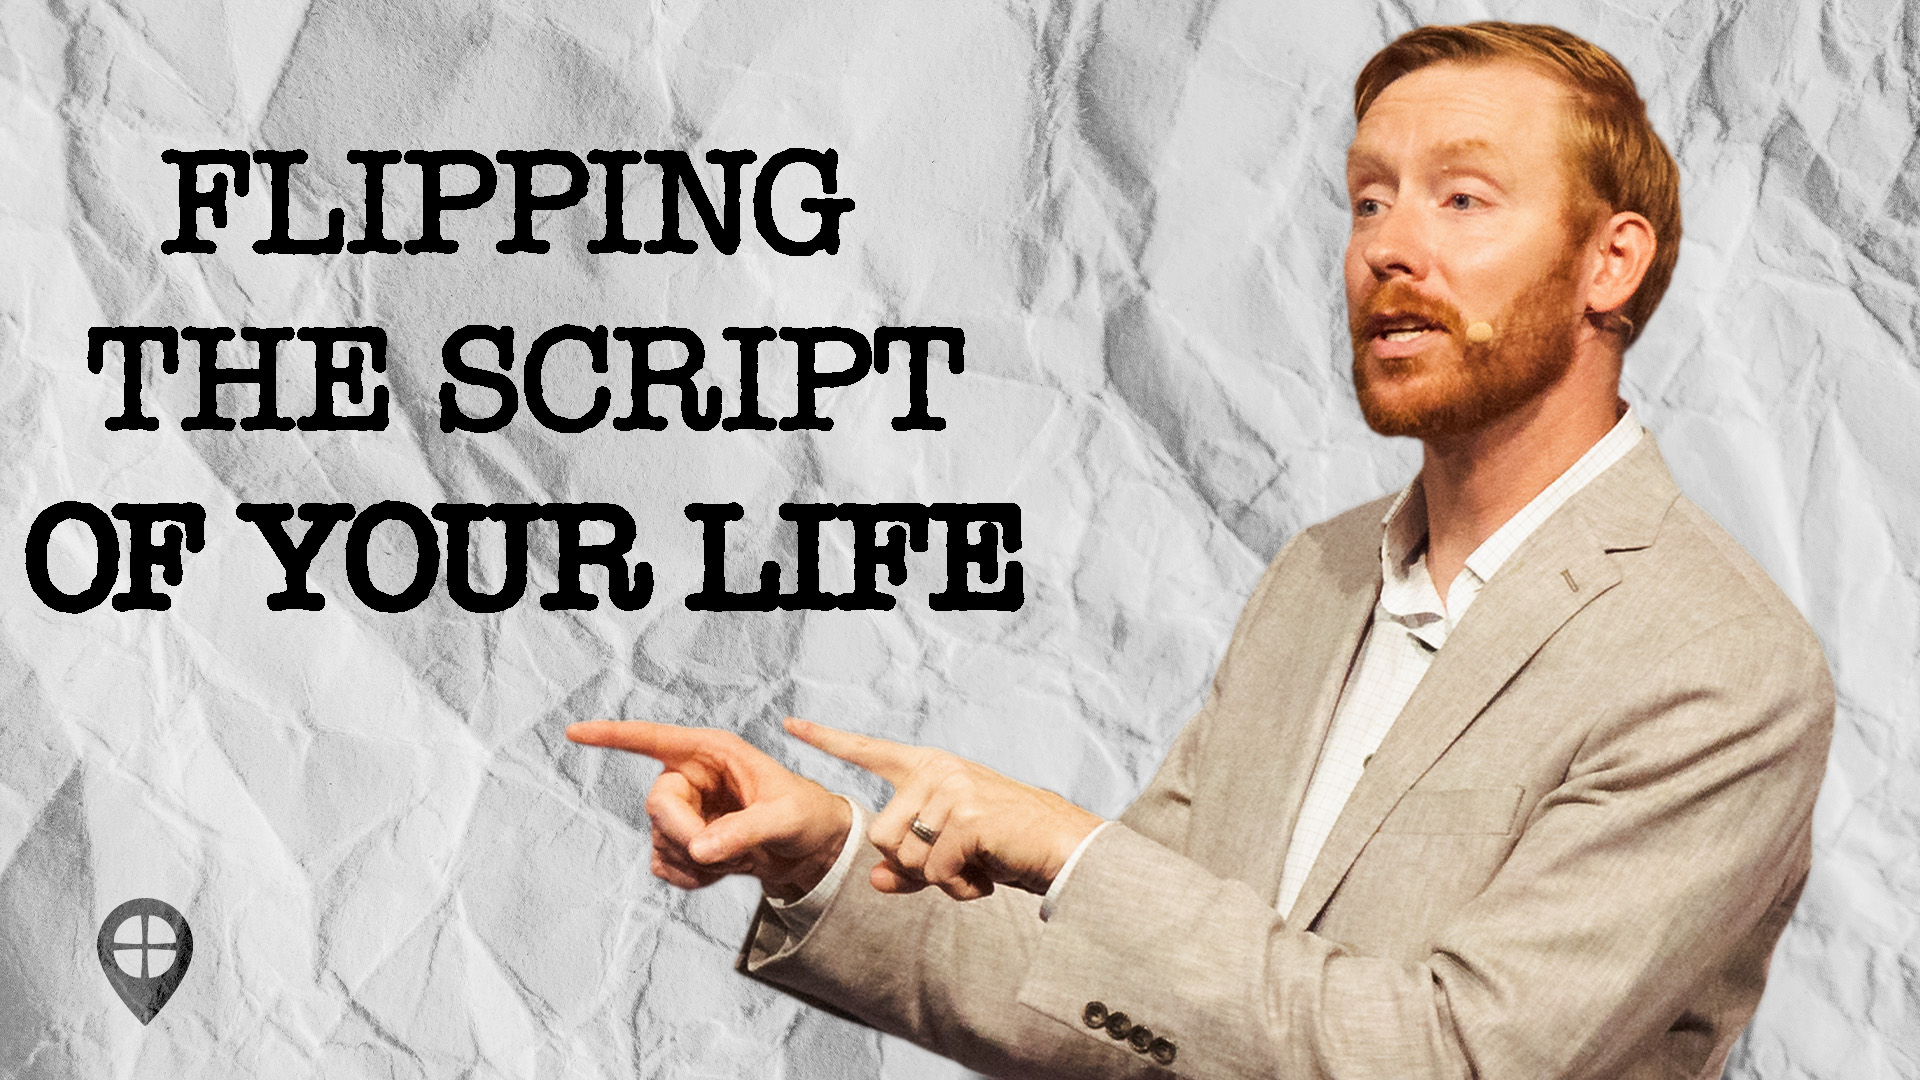 Flipping The Script Of Your Life